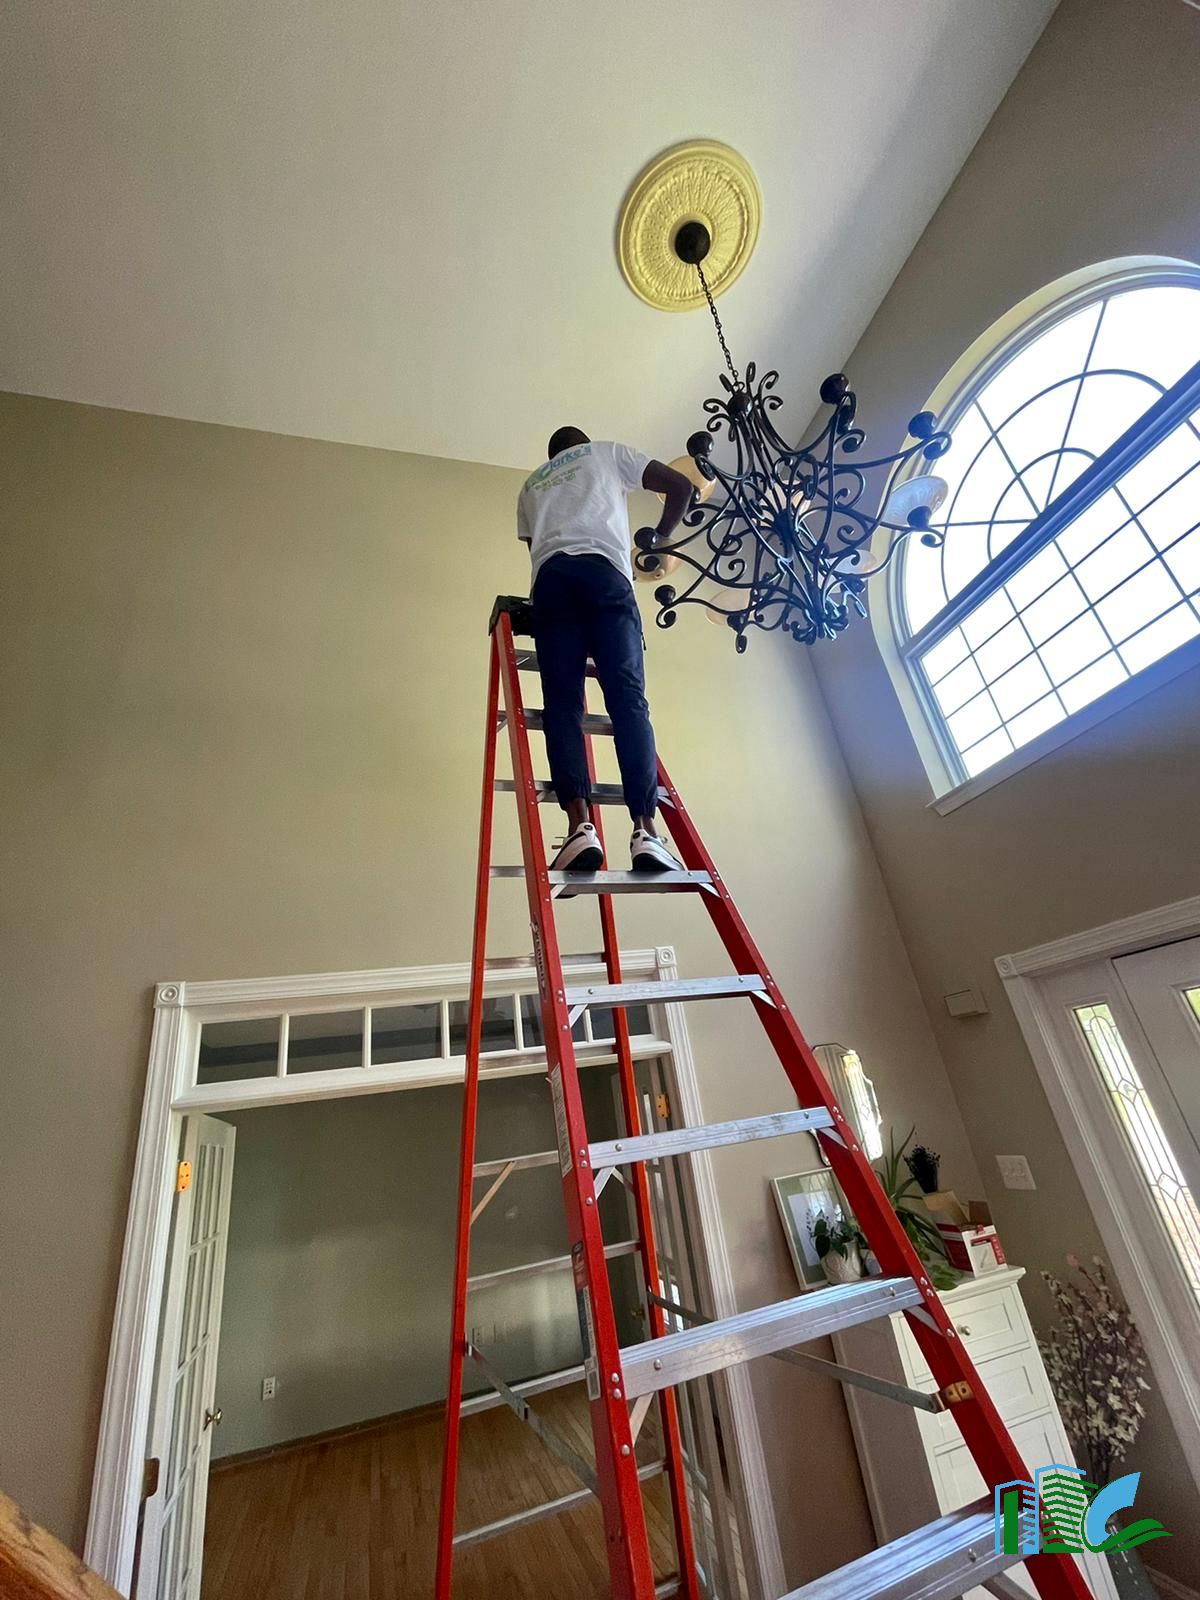 Chandelier Cleaners in New Jersey and New York